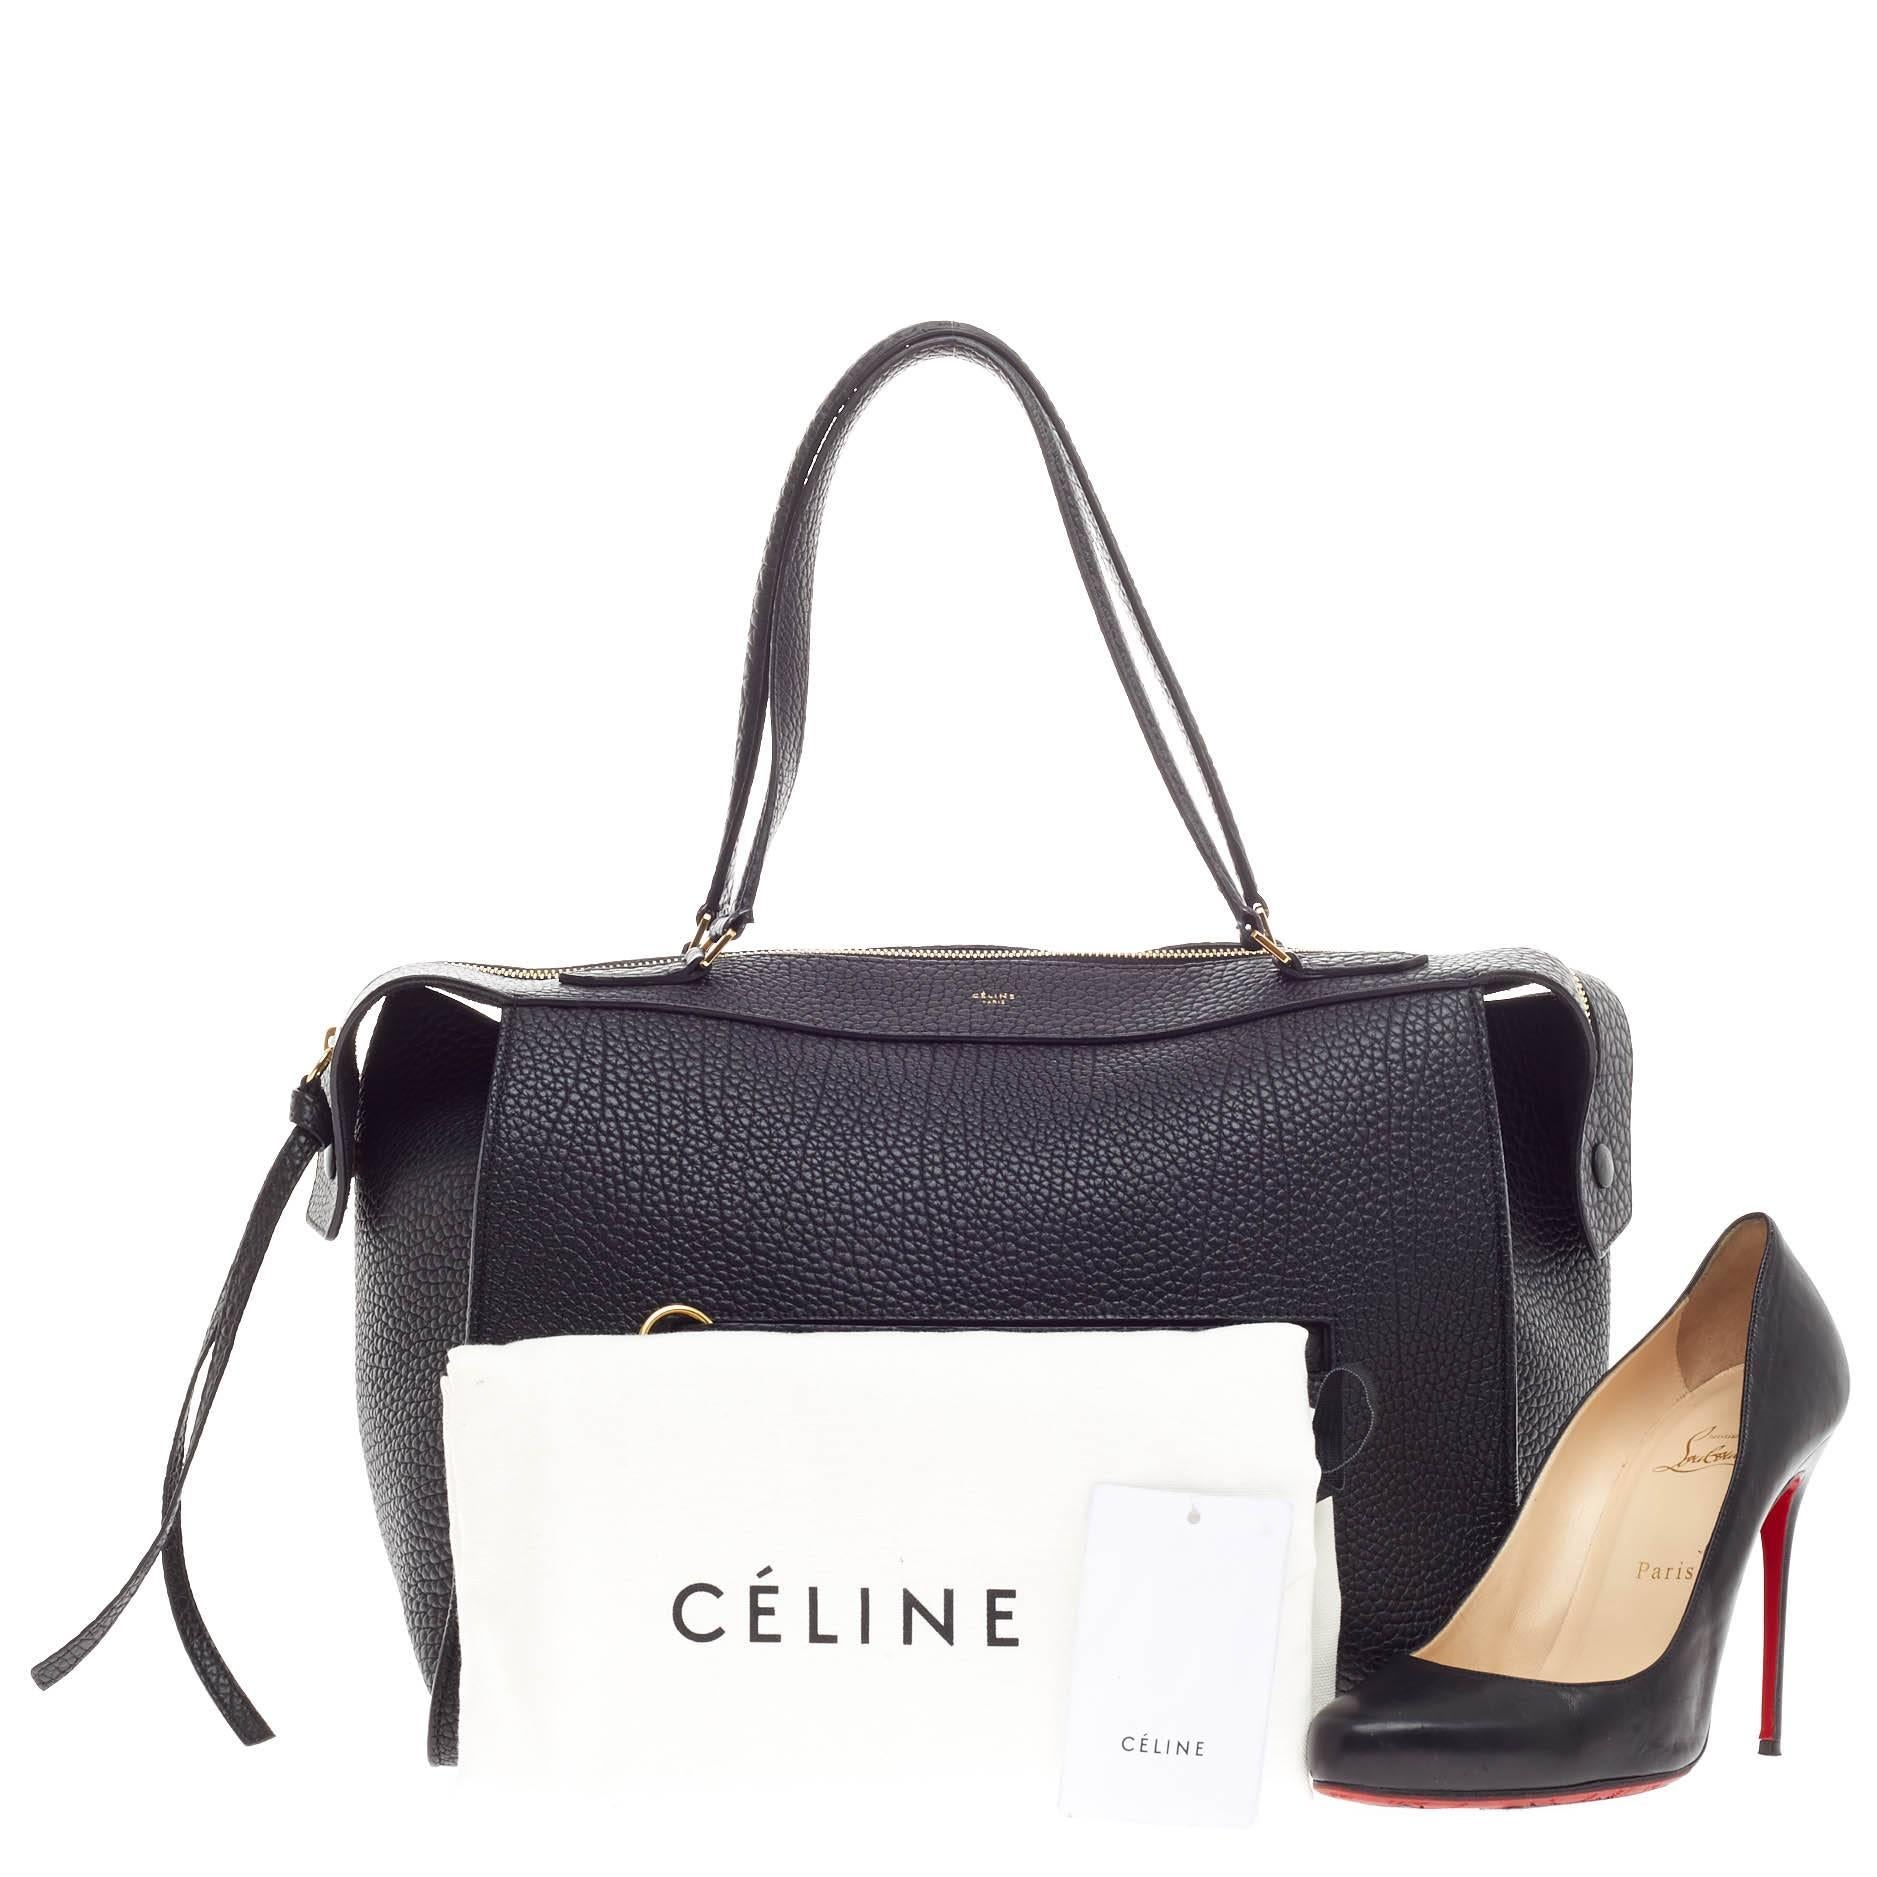 This authentic Celine Ring Bag Calfskin Medium presented in the brand's Spring 2015 Collection mixes clean sophistication with understated functionality. Designed in black bullhide calfskin leather, this subdued satchel features a soft-structured